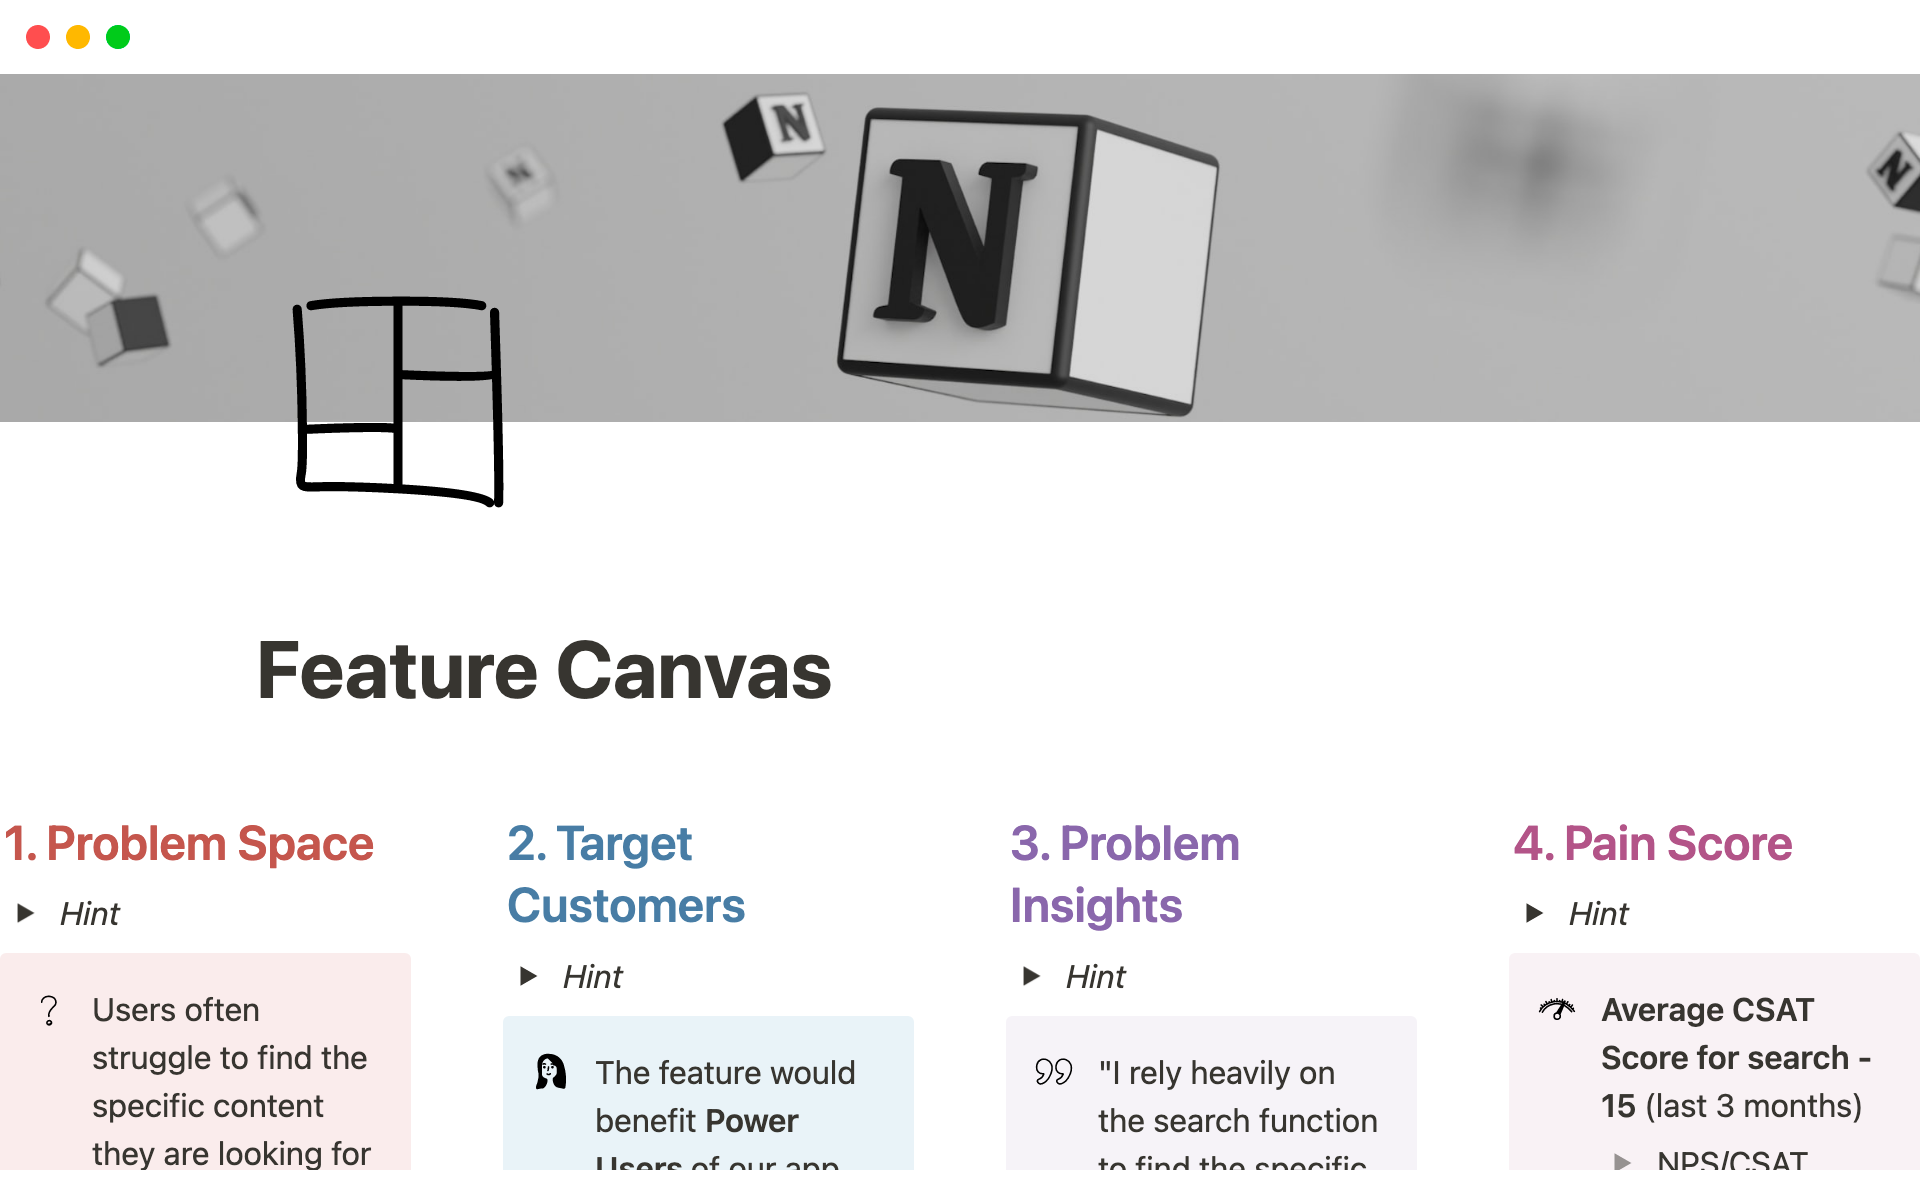 Feature Canvas provides all the information you need, on a single page!